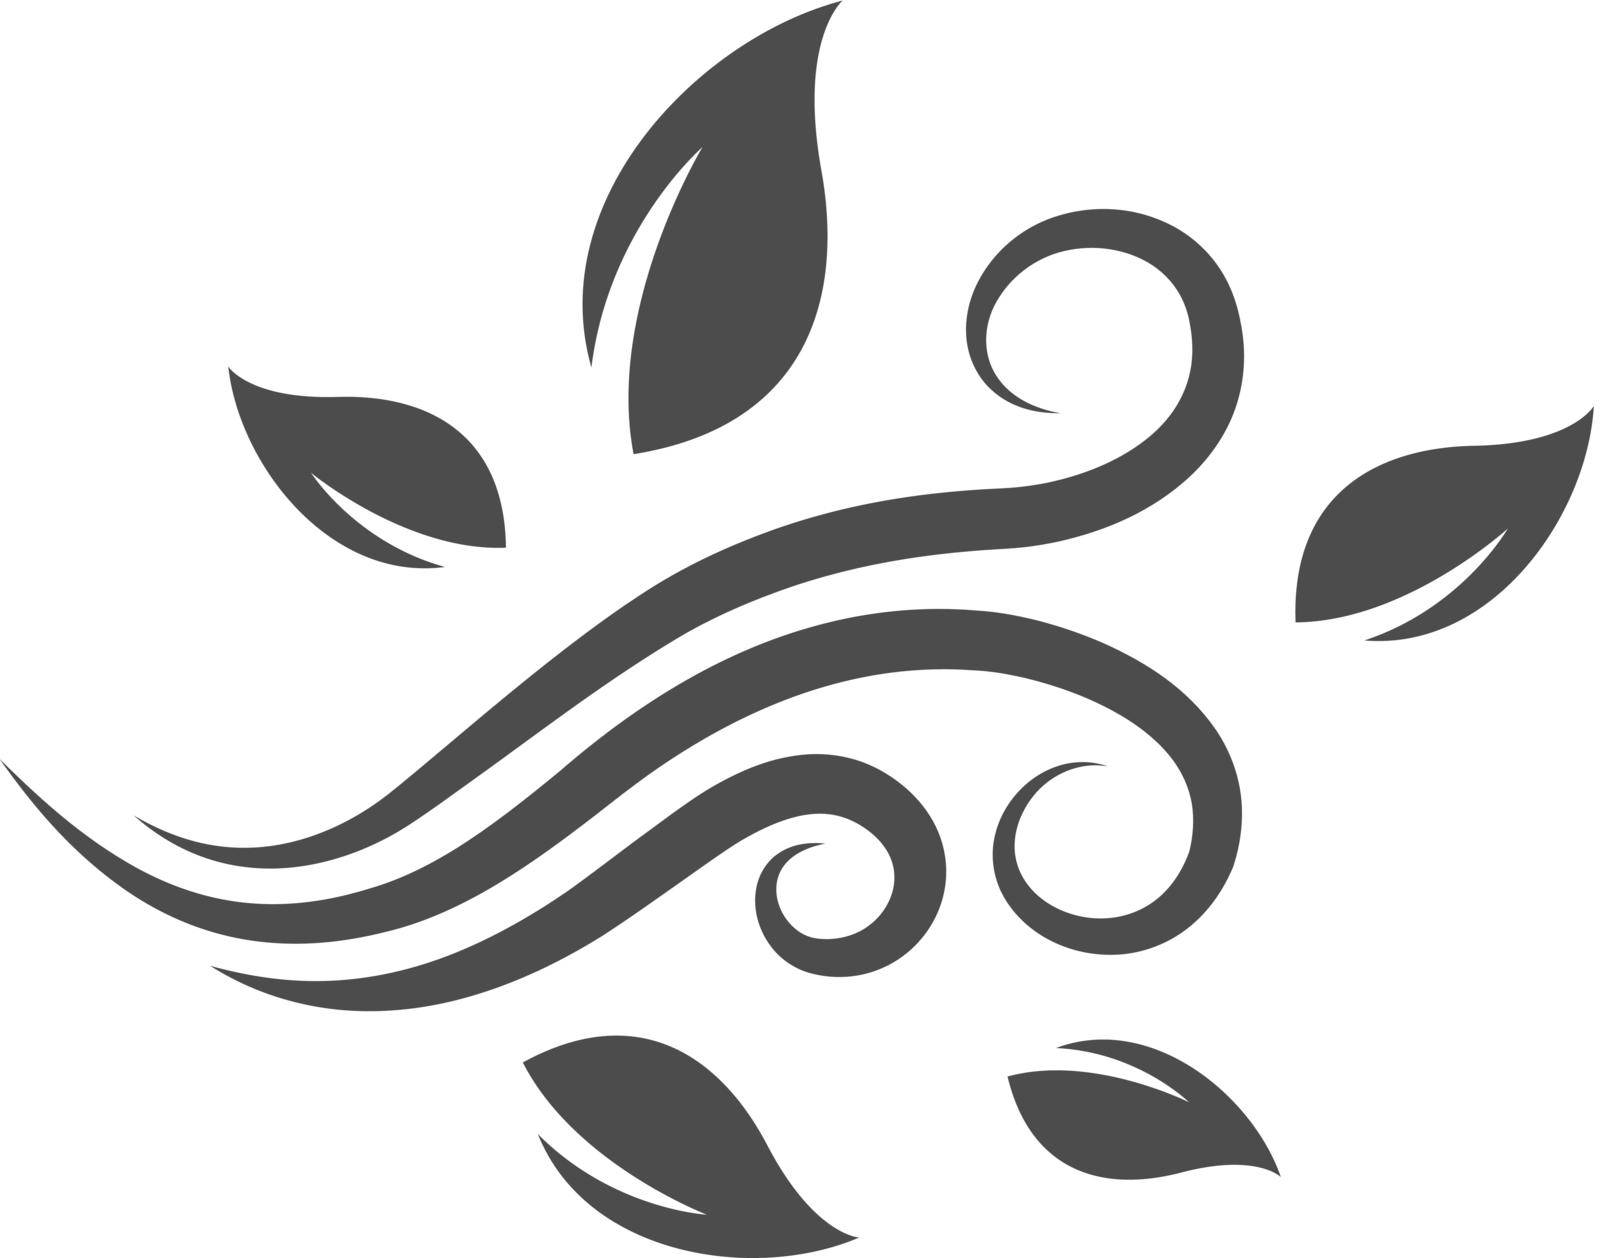 Blowing leaves icon in single grey color. Autumn fall falling windy weather forecast